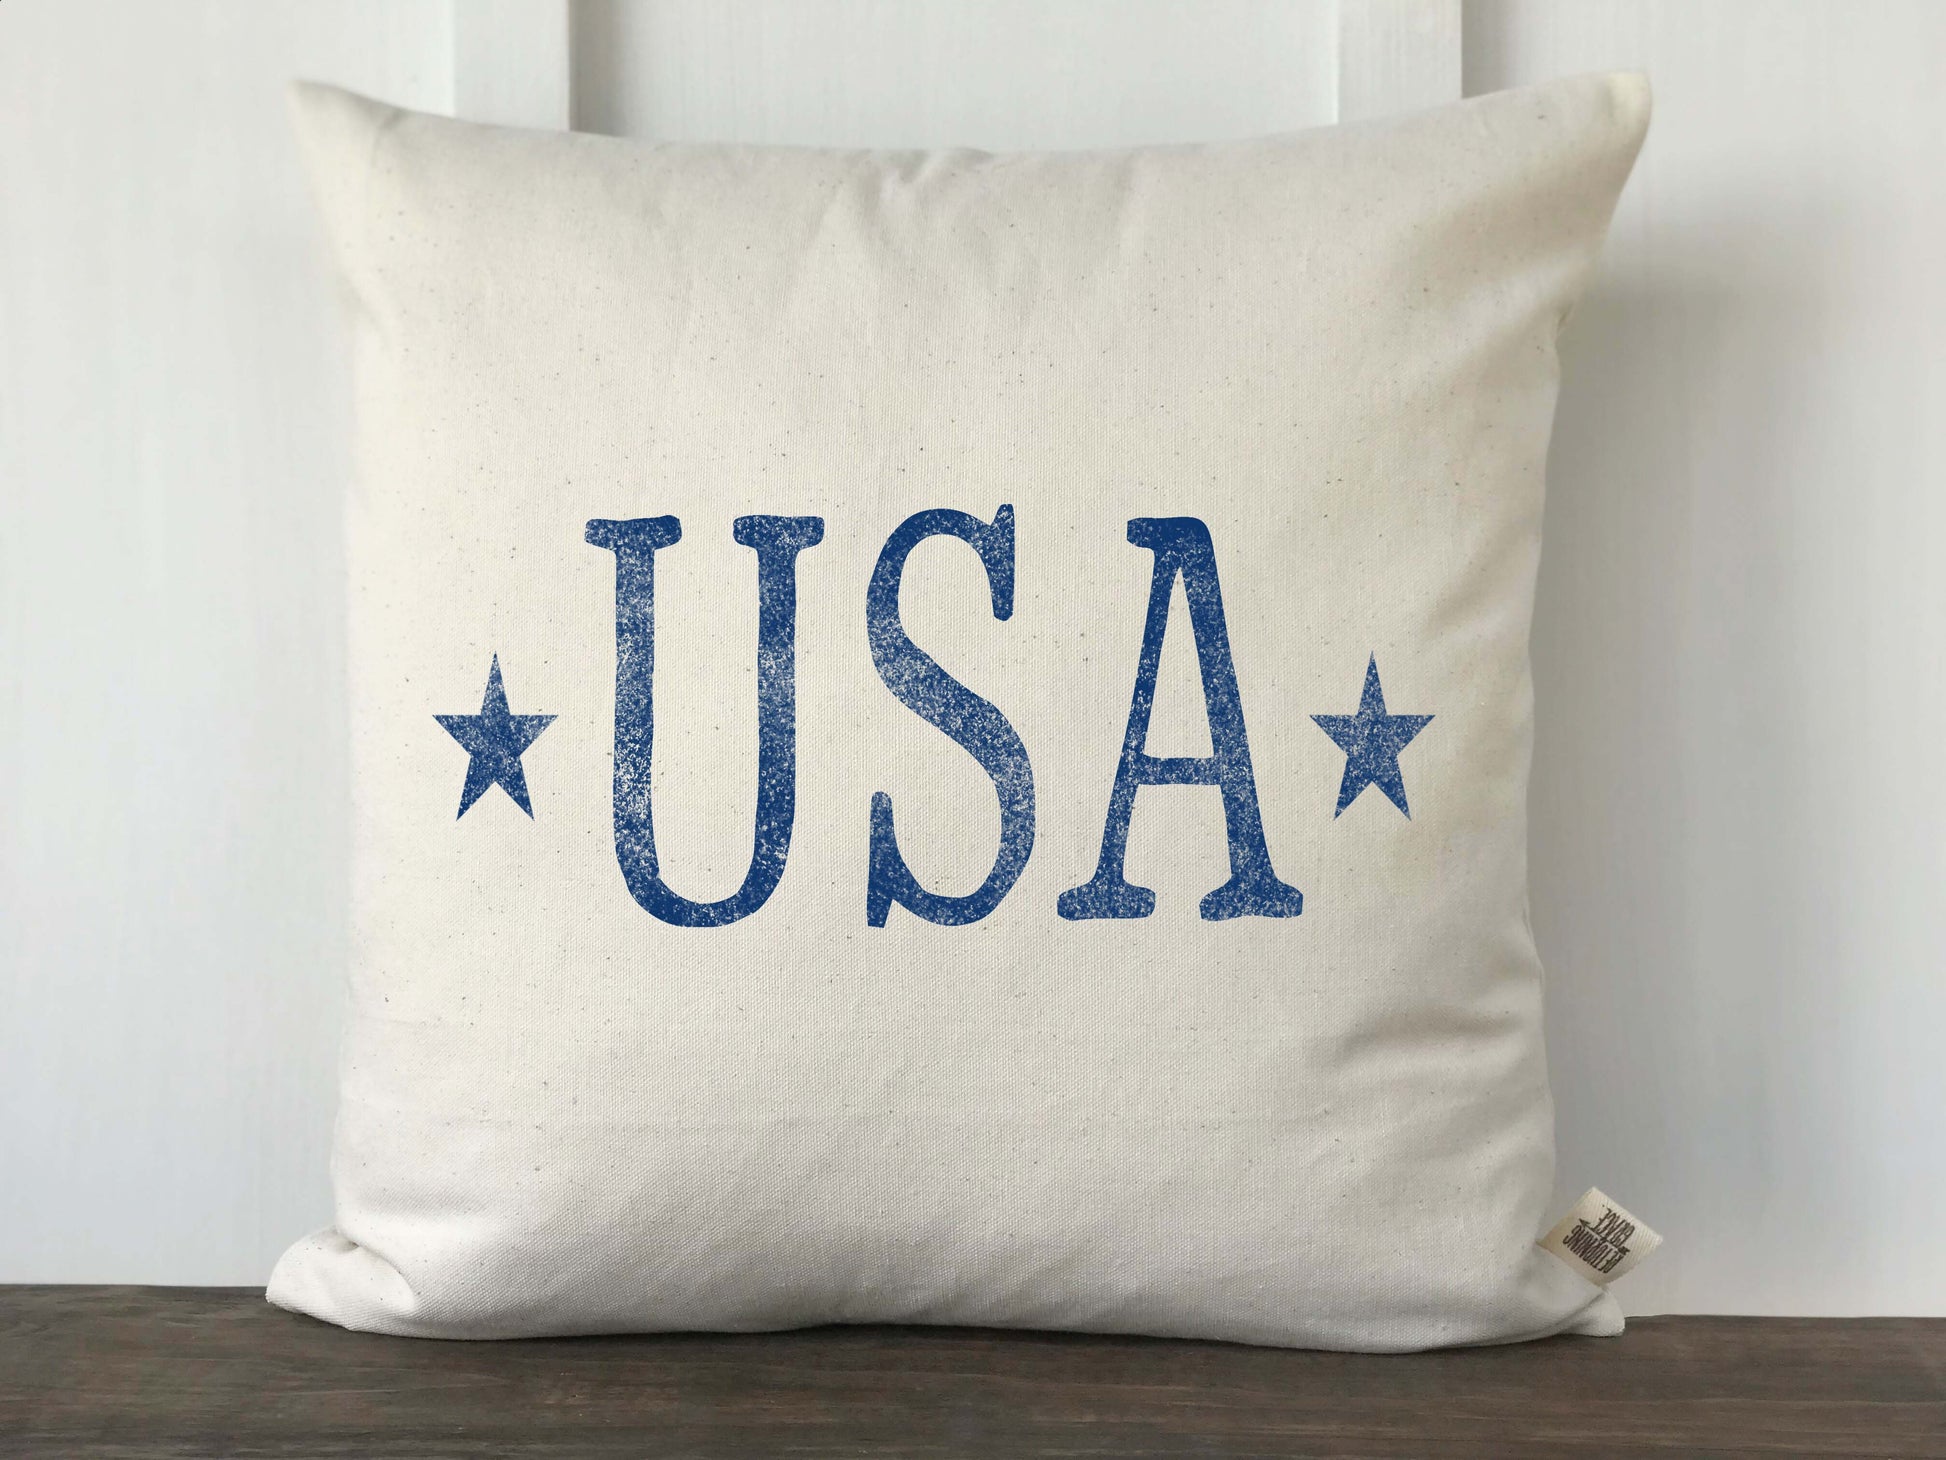 USA Letters with Stars Distressed Pillow Cover - Returning Grace Designs